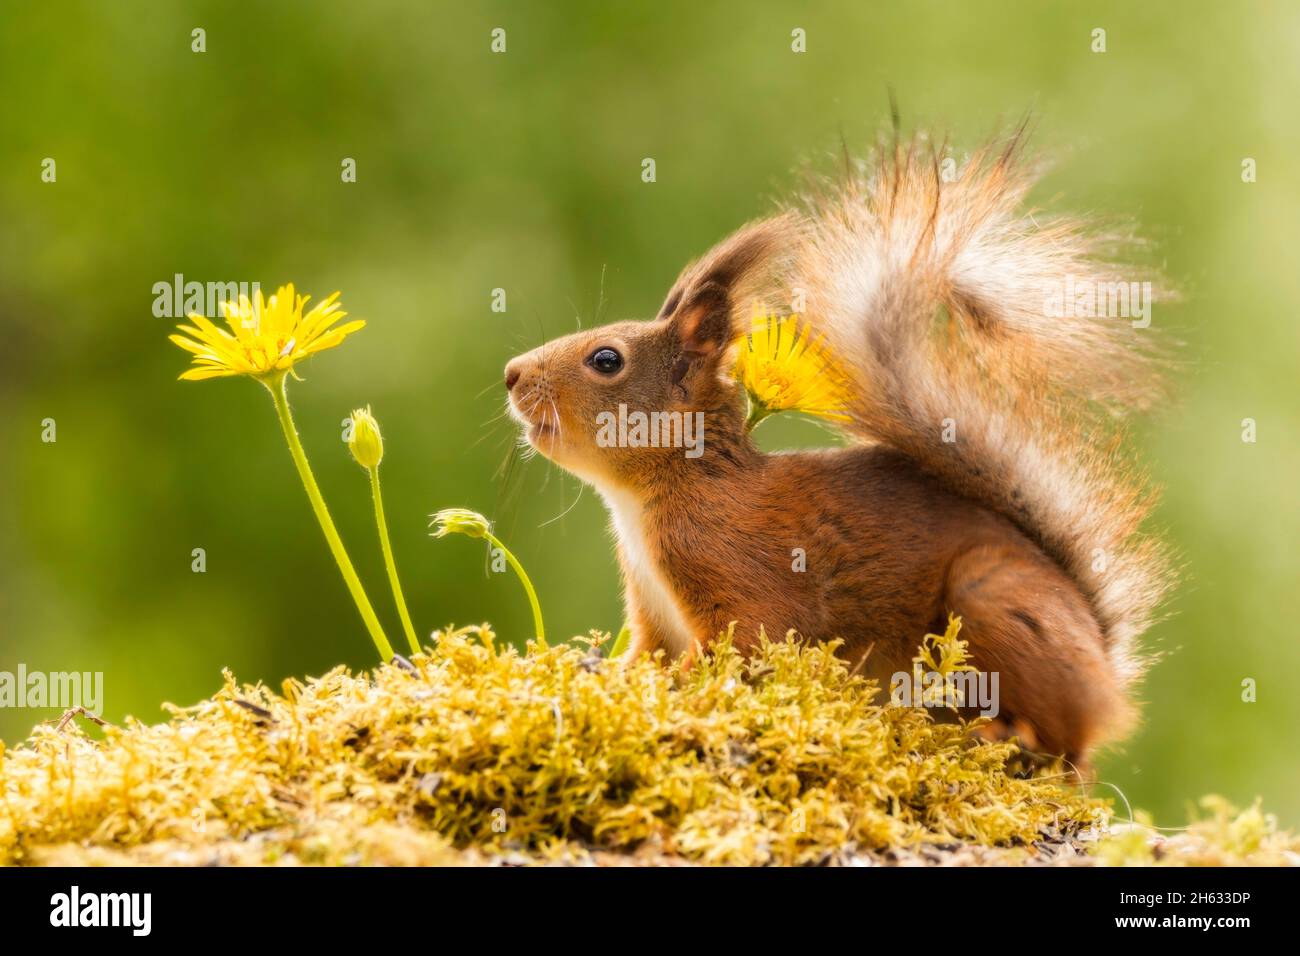 close up of red squirrel standing with yellow flowers looking away Stock Photo